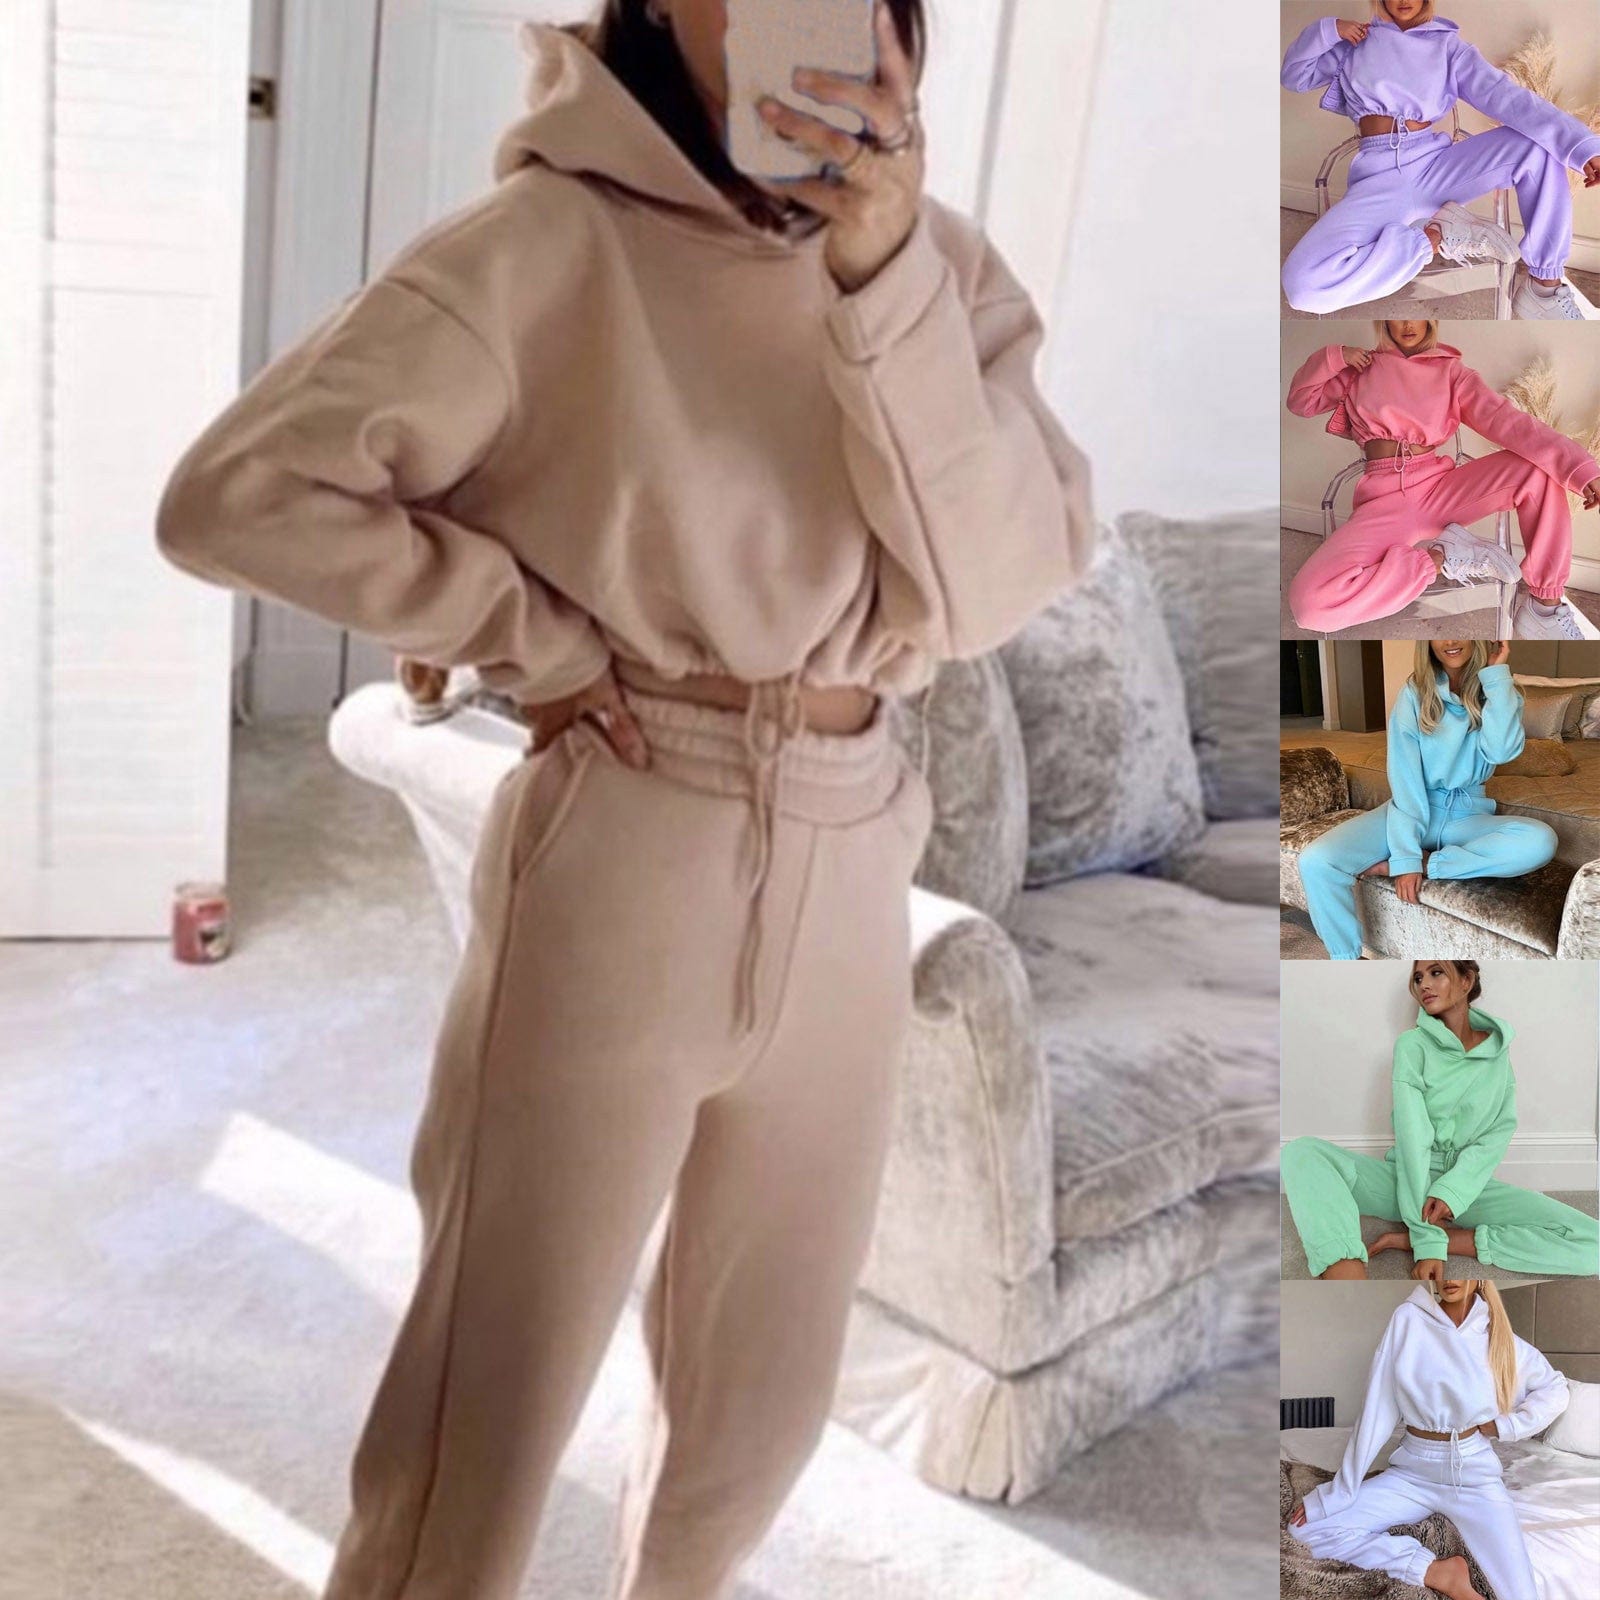 ALLRJ Jogging suit Jogging Suits For Women 2 Piece Sweatsuits Tracksuits Sexy Long Sleeve HoodieCasual Fitness Sportswear